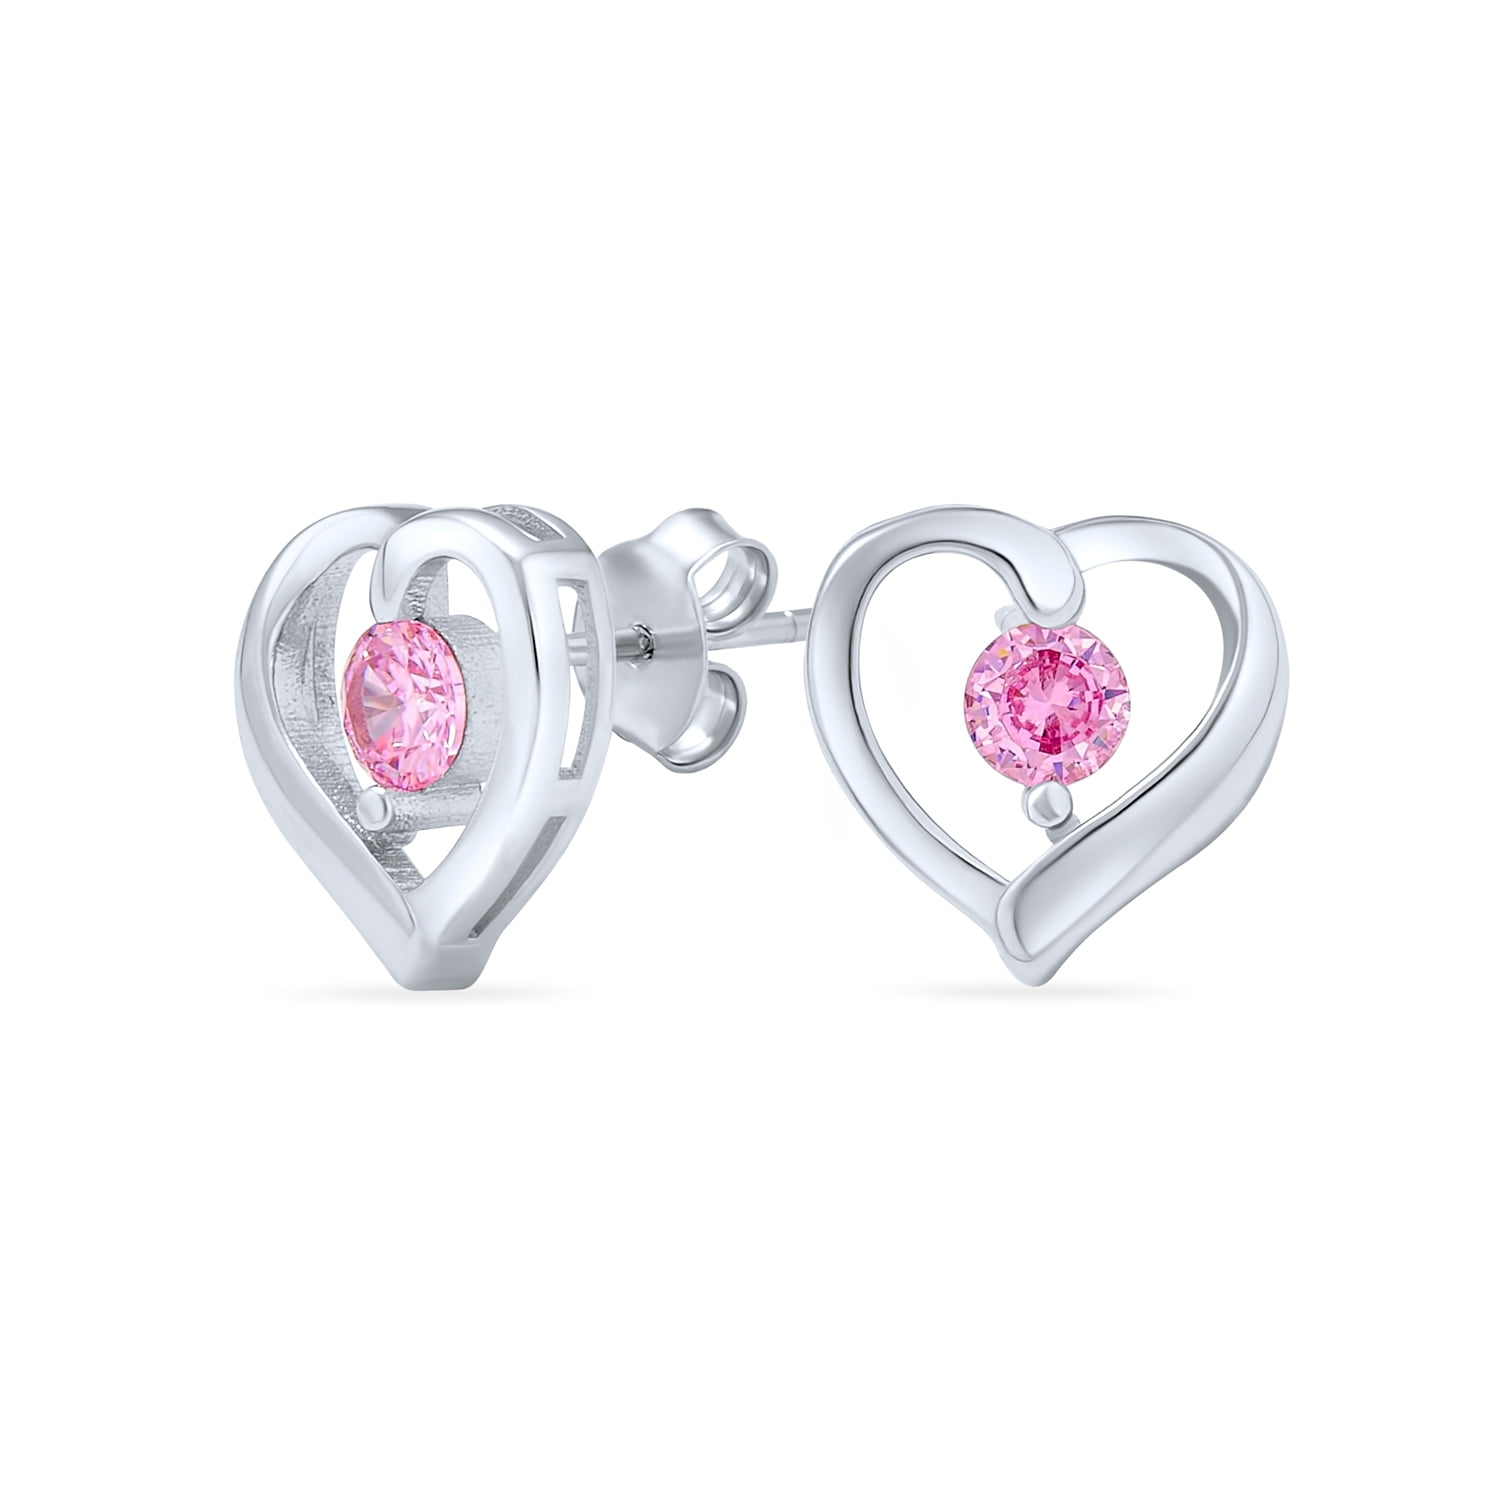 Details about   Polished Silver Hearts Puffed Textured Design  Stud earrings